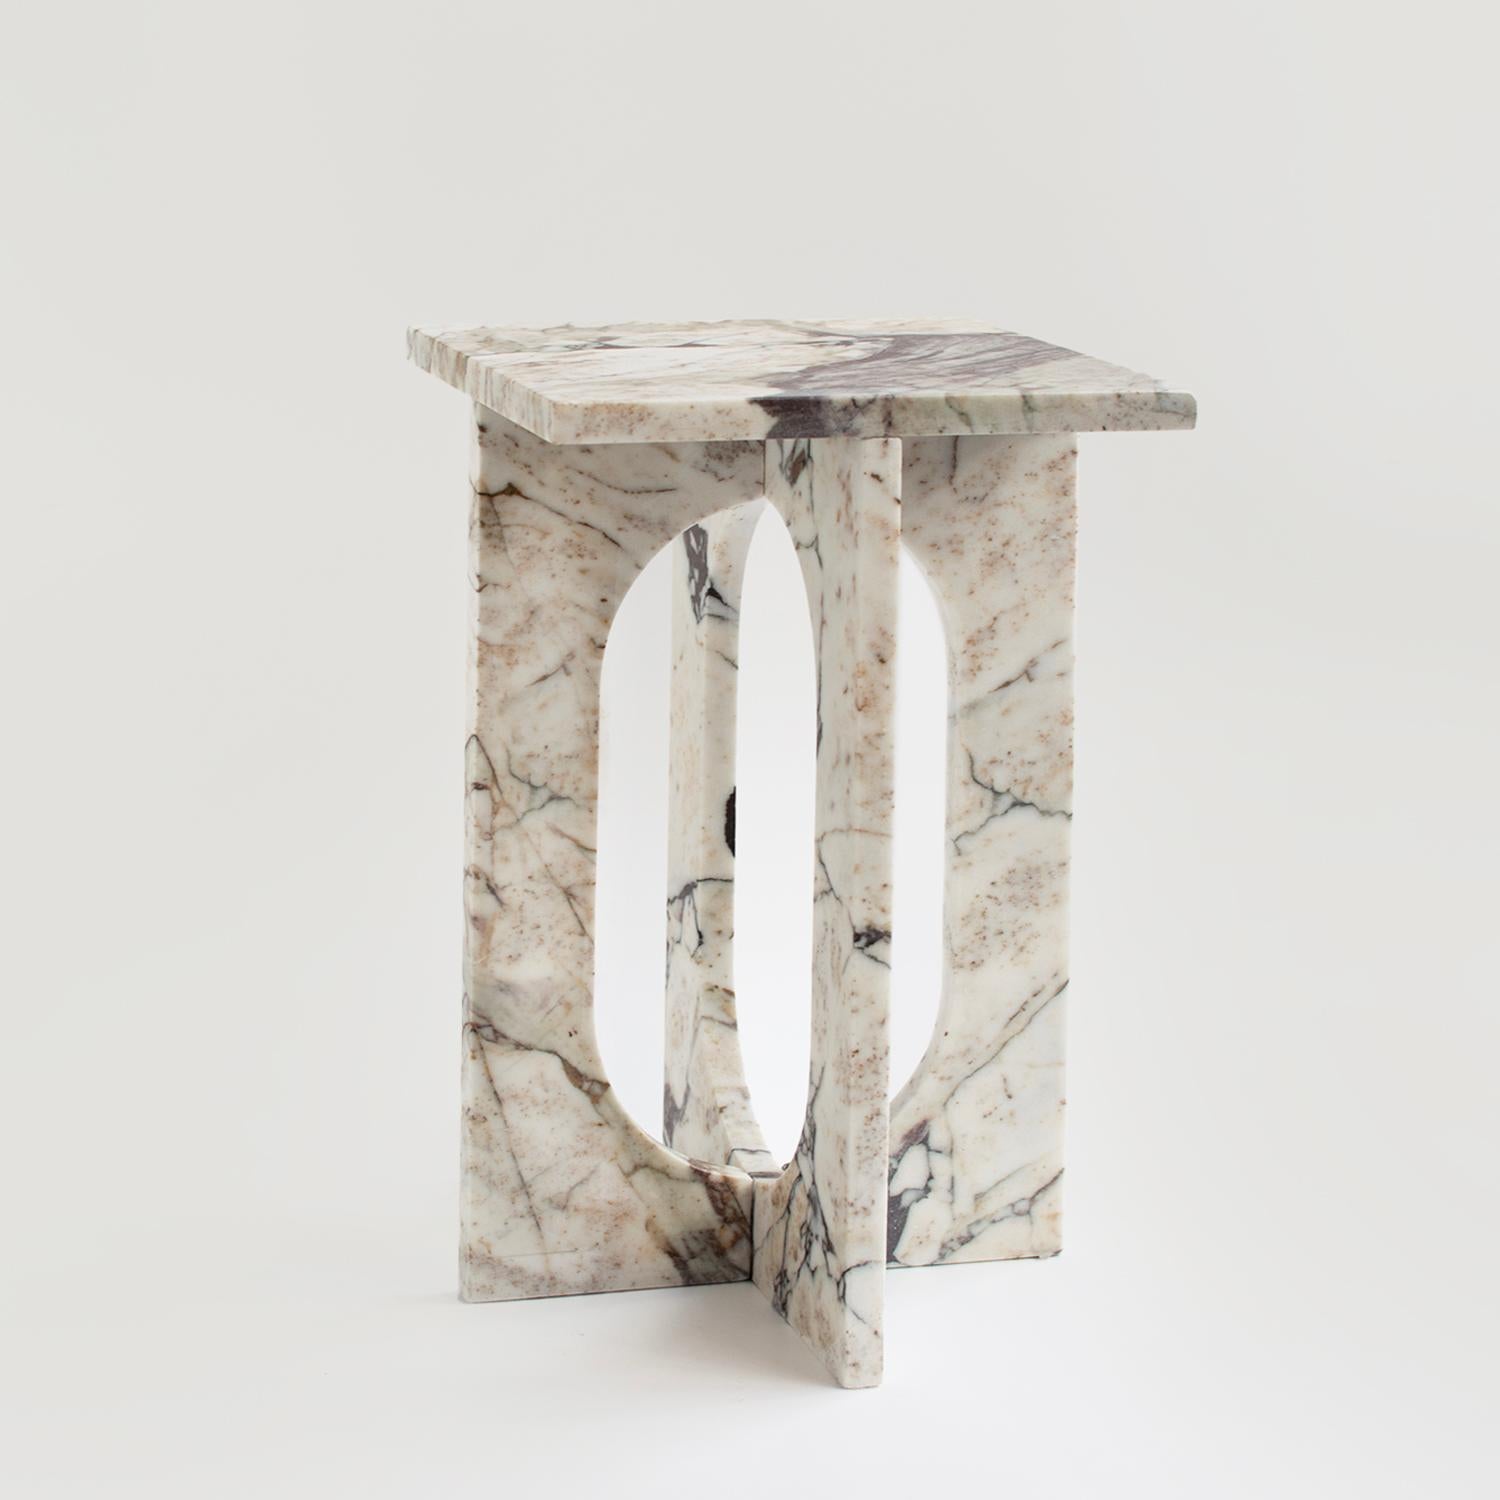 BOND Side Table in Calacatta Marble -  Bond Side Table evokes simplicity with its modern, clean design. Crafted from honed marble, this piece is a stylish addition to any space with its sophisticated, clean lines and sleek construction. Use 'Bond'